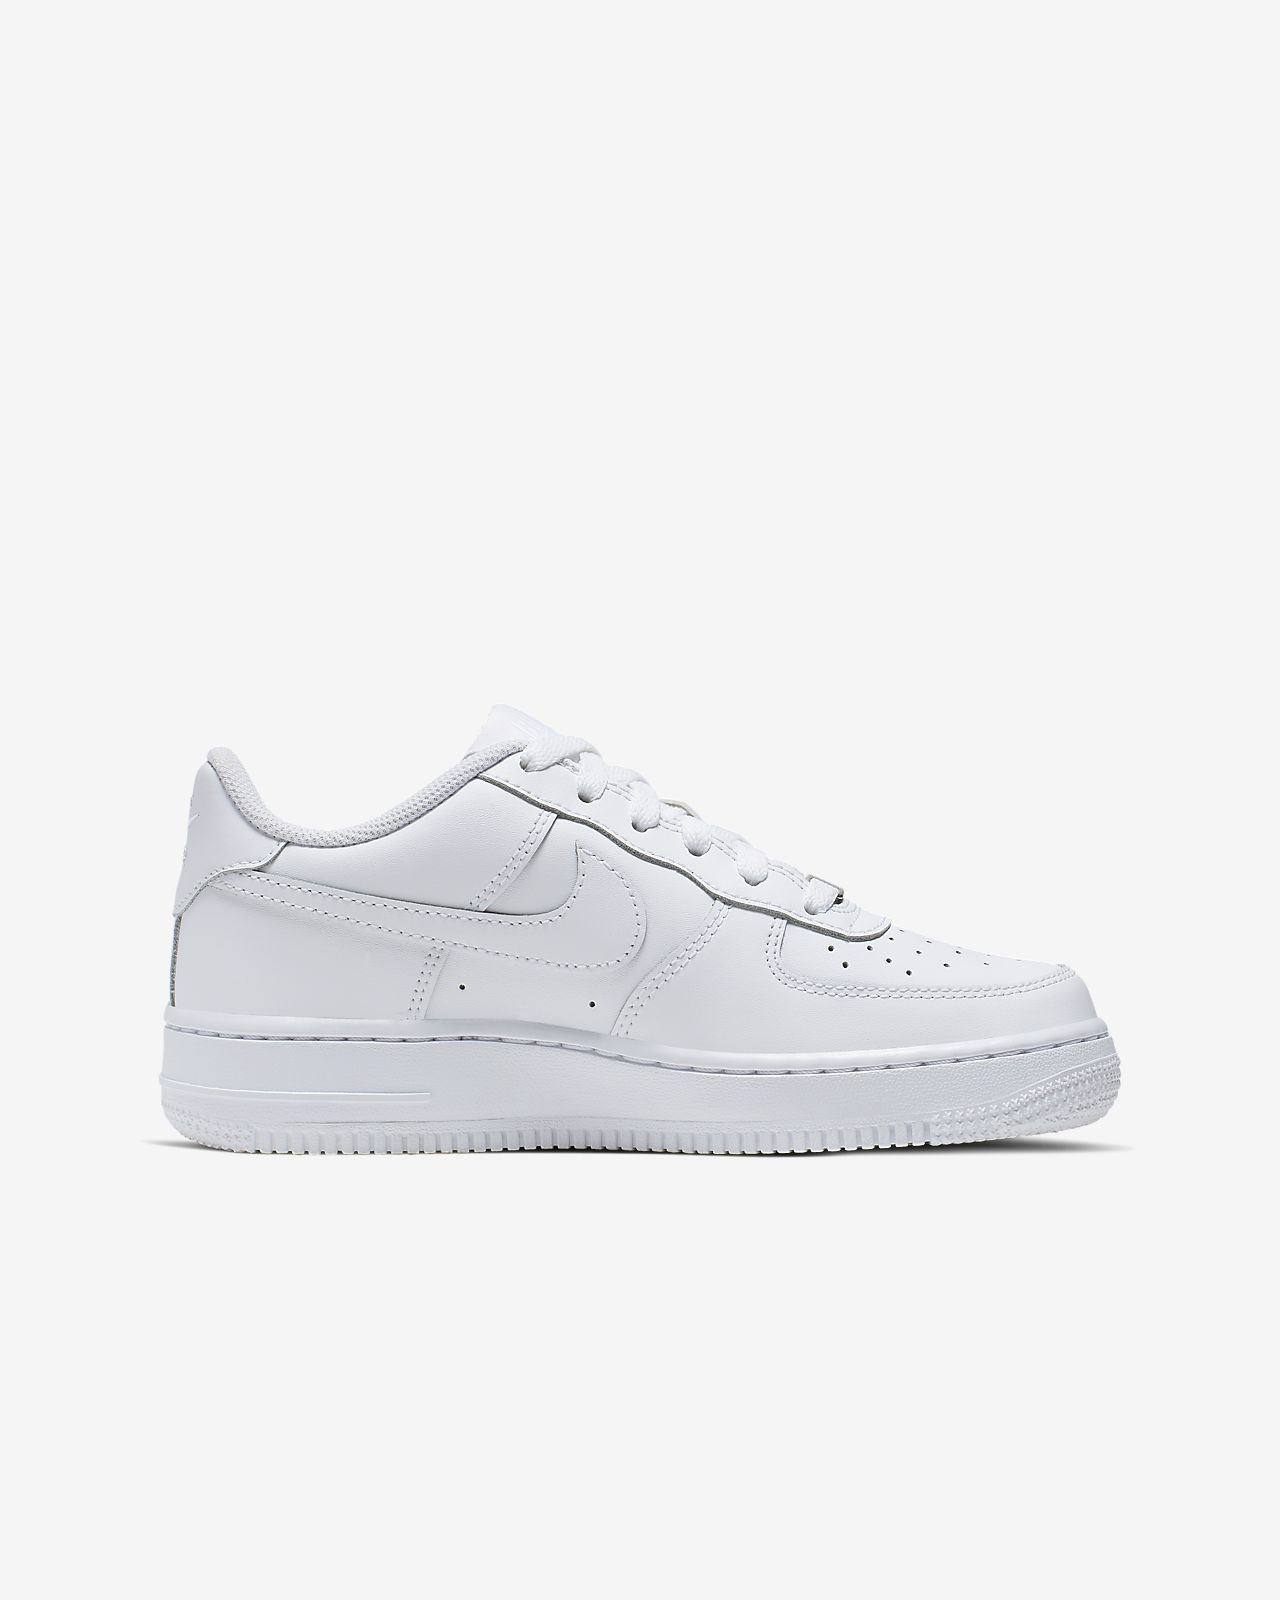 air force 1 size 1